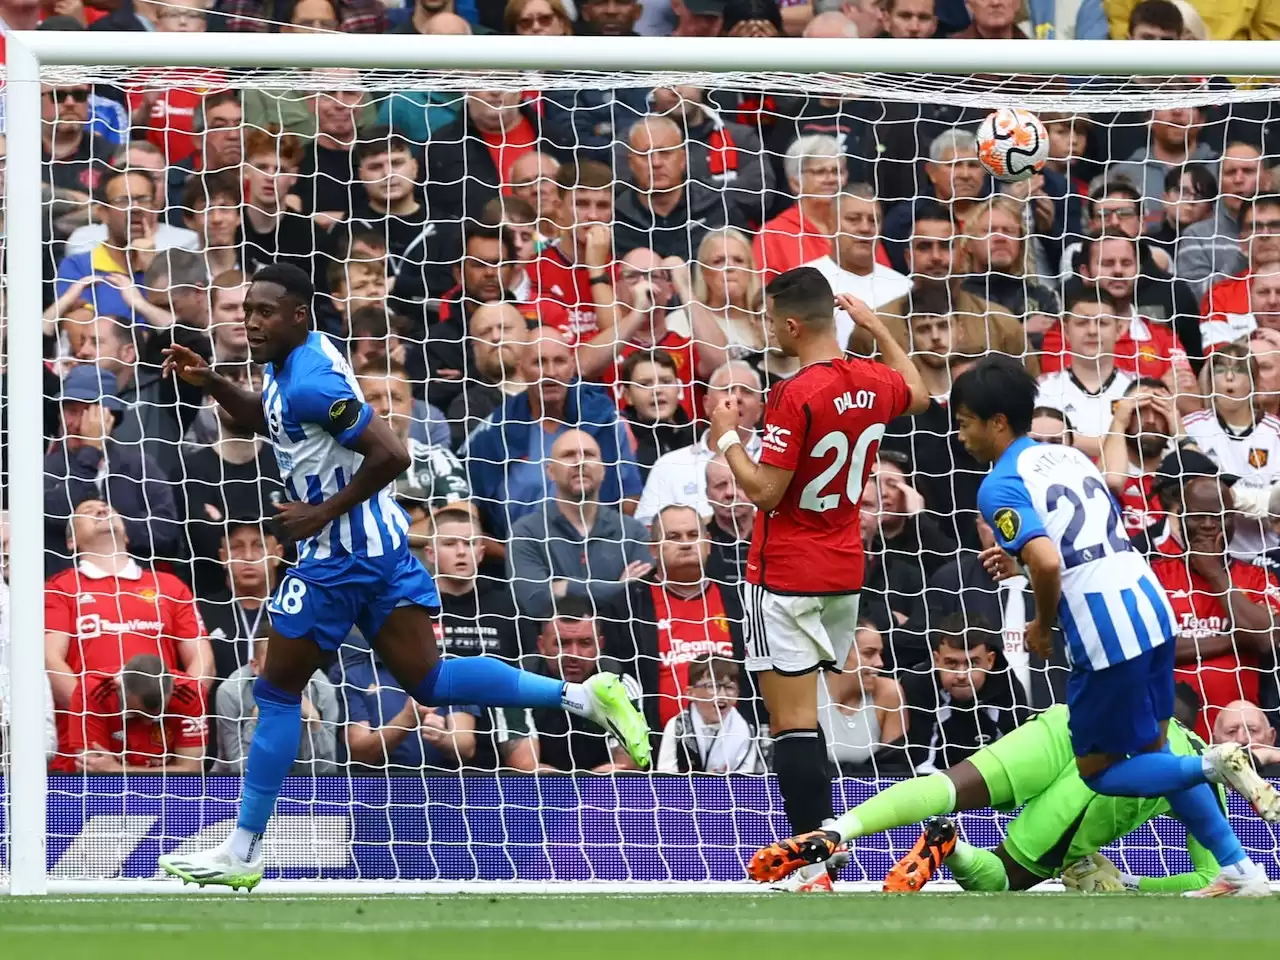 Manchester United's struggles persist as Brighton clinch victory at Old Trafford